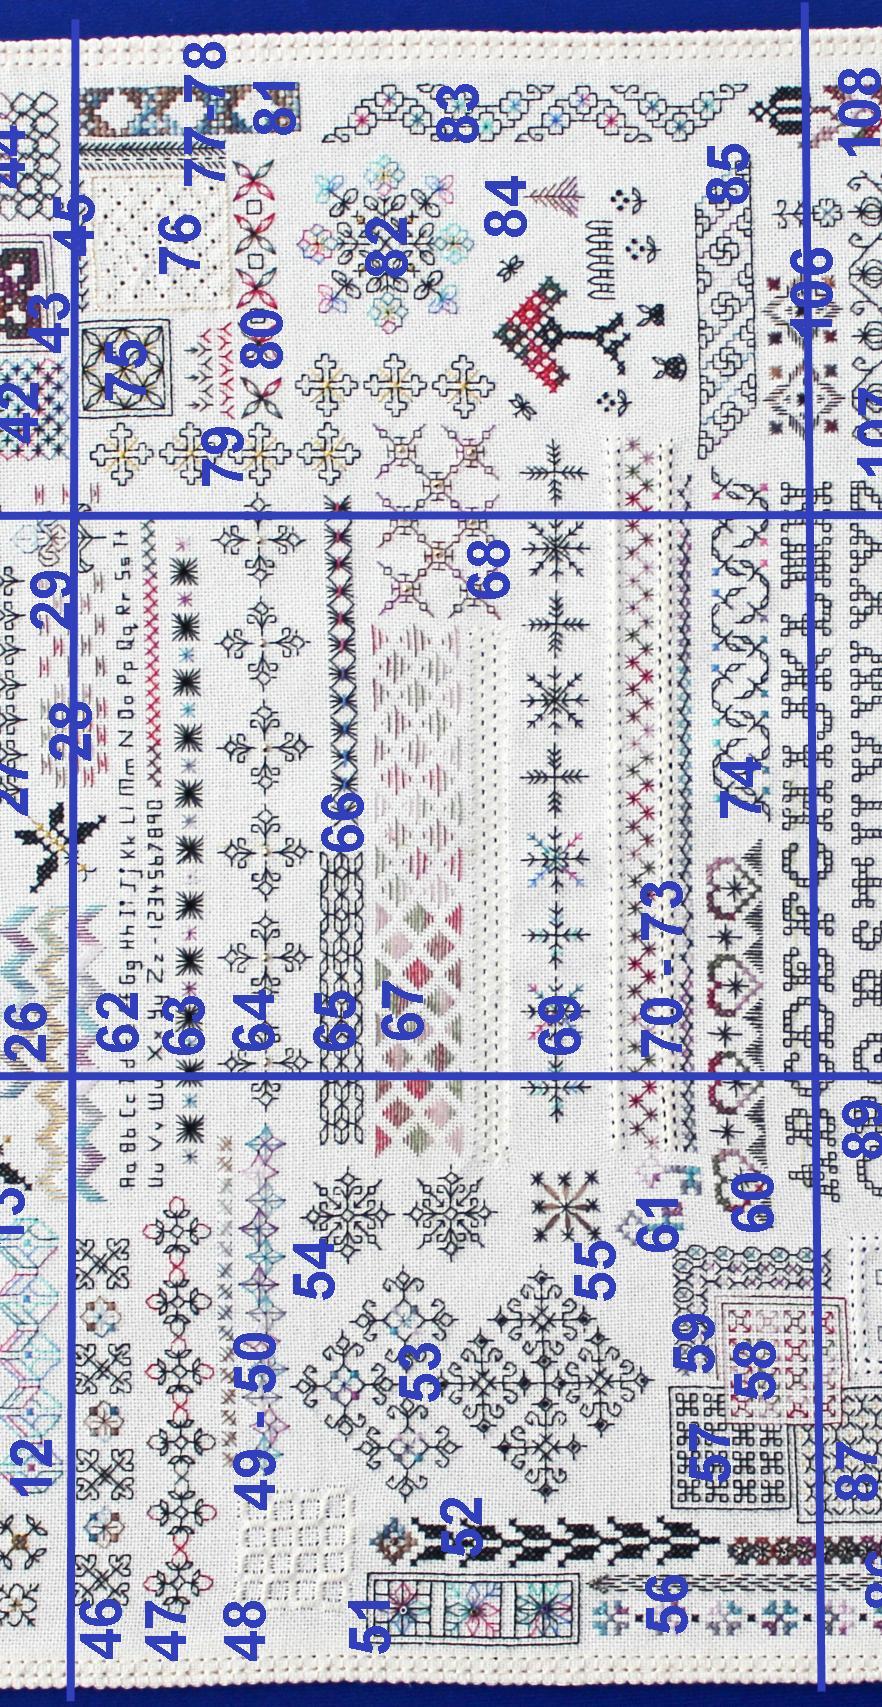 'Sublime Stitches' Evenweave Pages 4-6 Patterns 46-85 To help position the patterns correctly on the fabric and to see how they relate to each other look carefully at the embroidery.